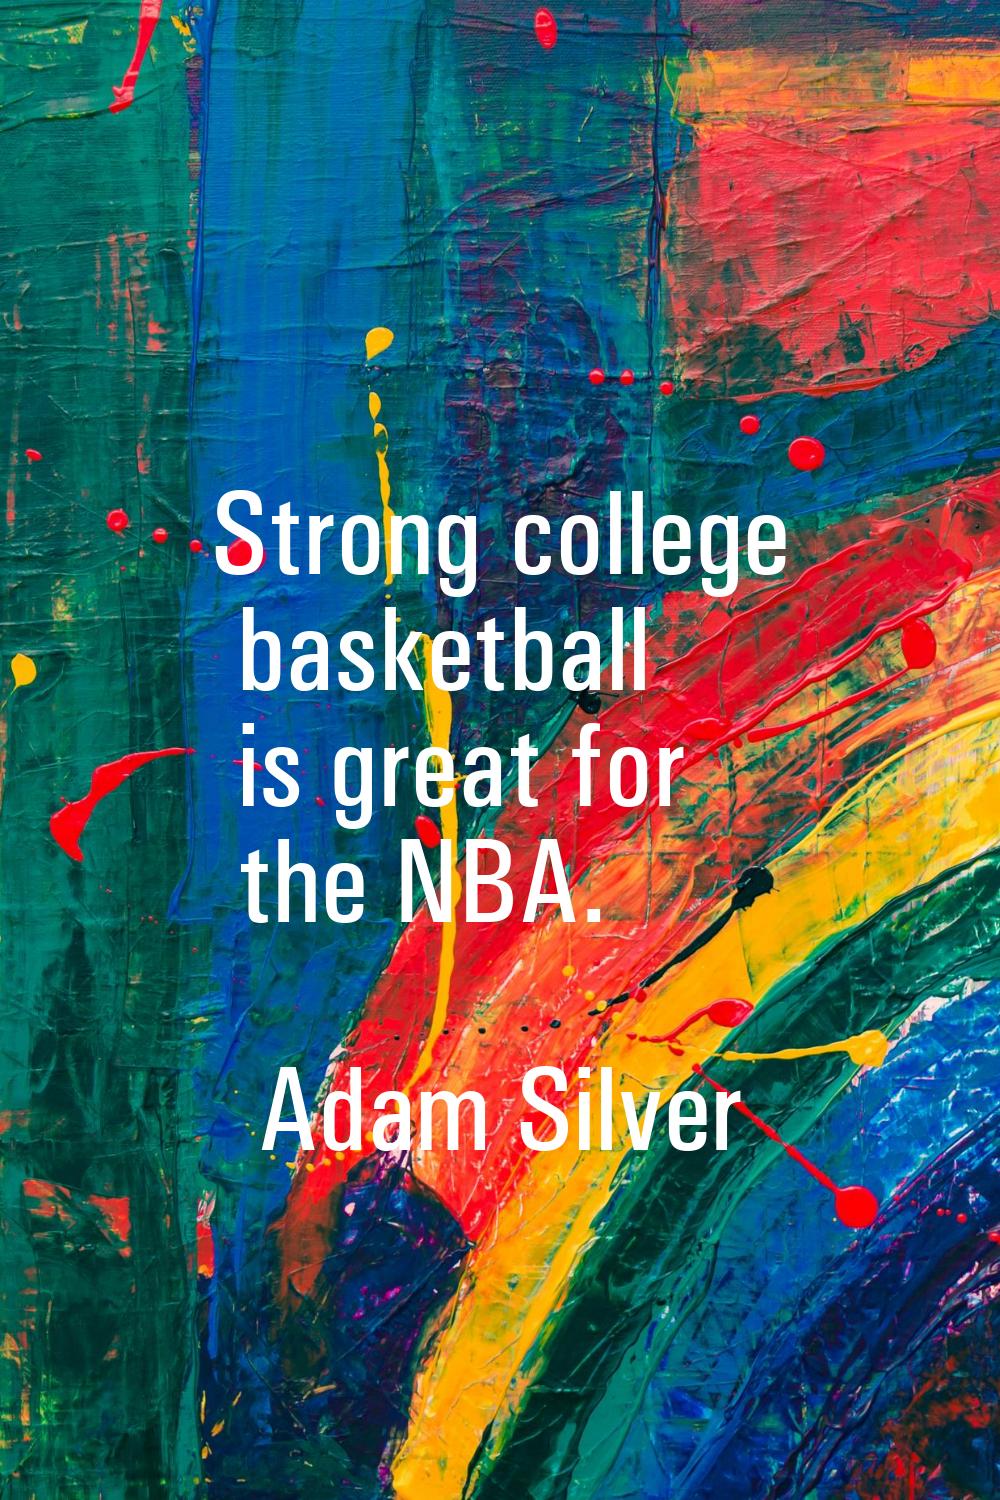 Strong college basketball is great for the NBA.